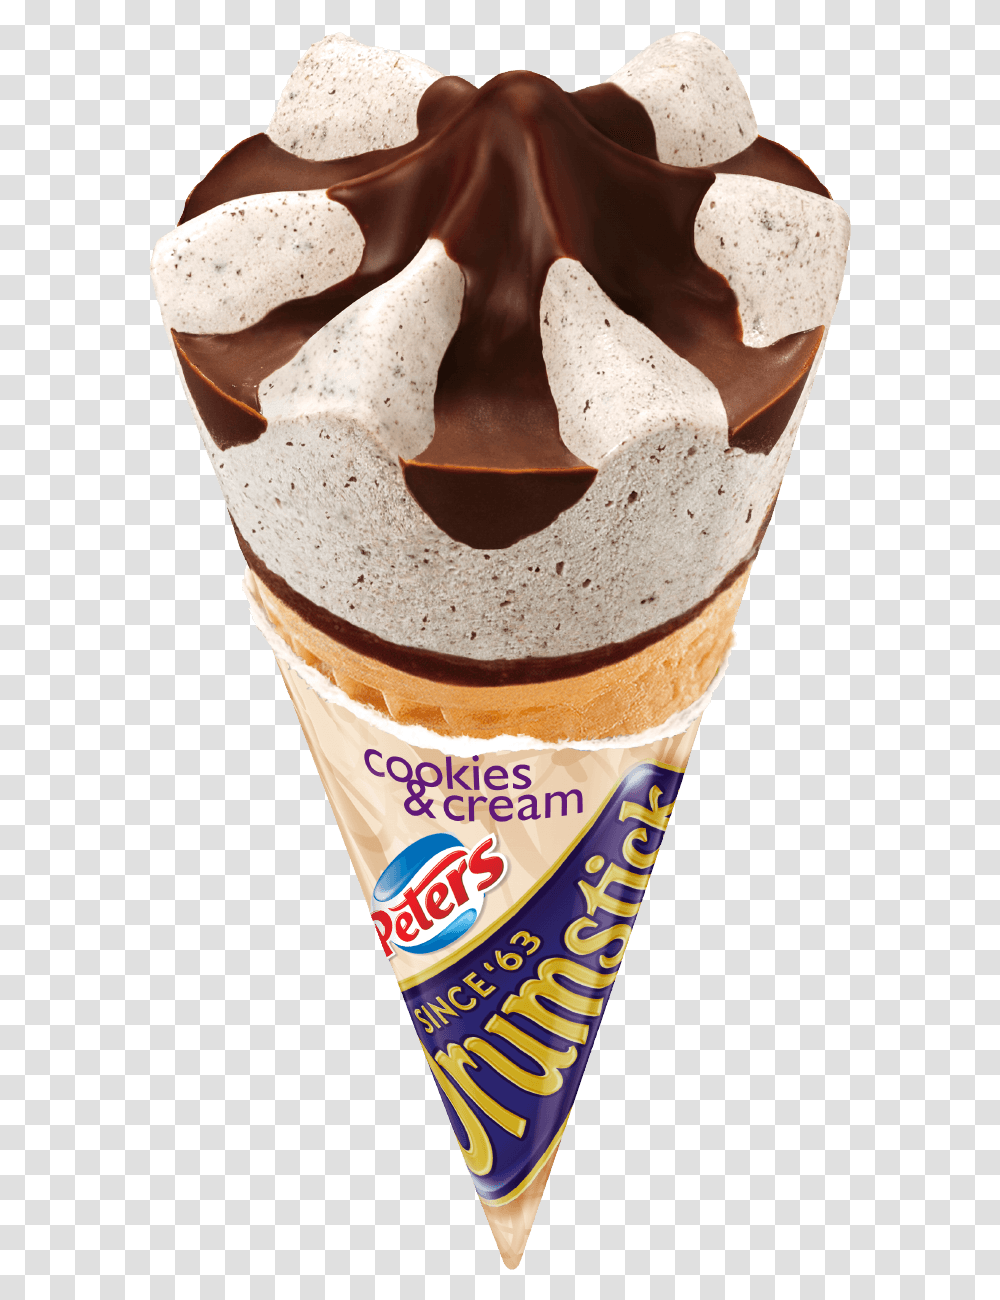 Ice Cream Cones Dessert Food Peters Ice Cream, Creme, Person, Human, Sweets Transparent Png